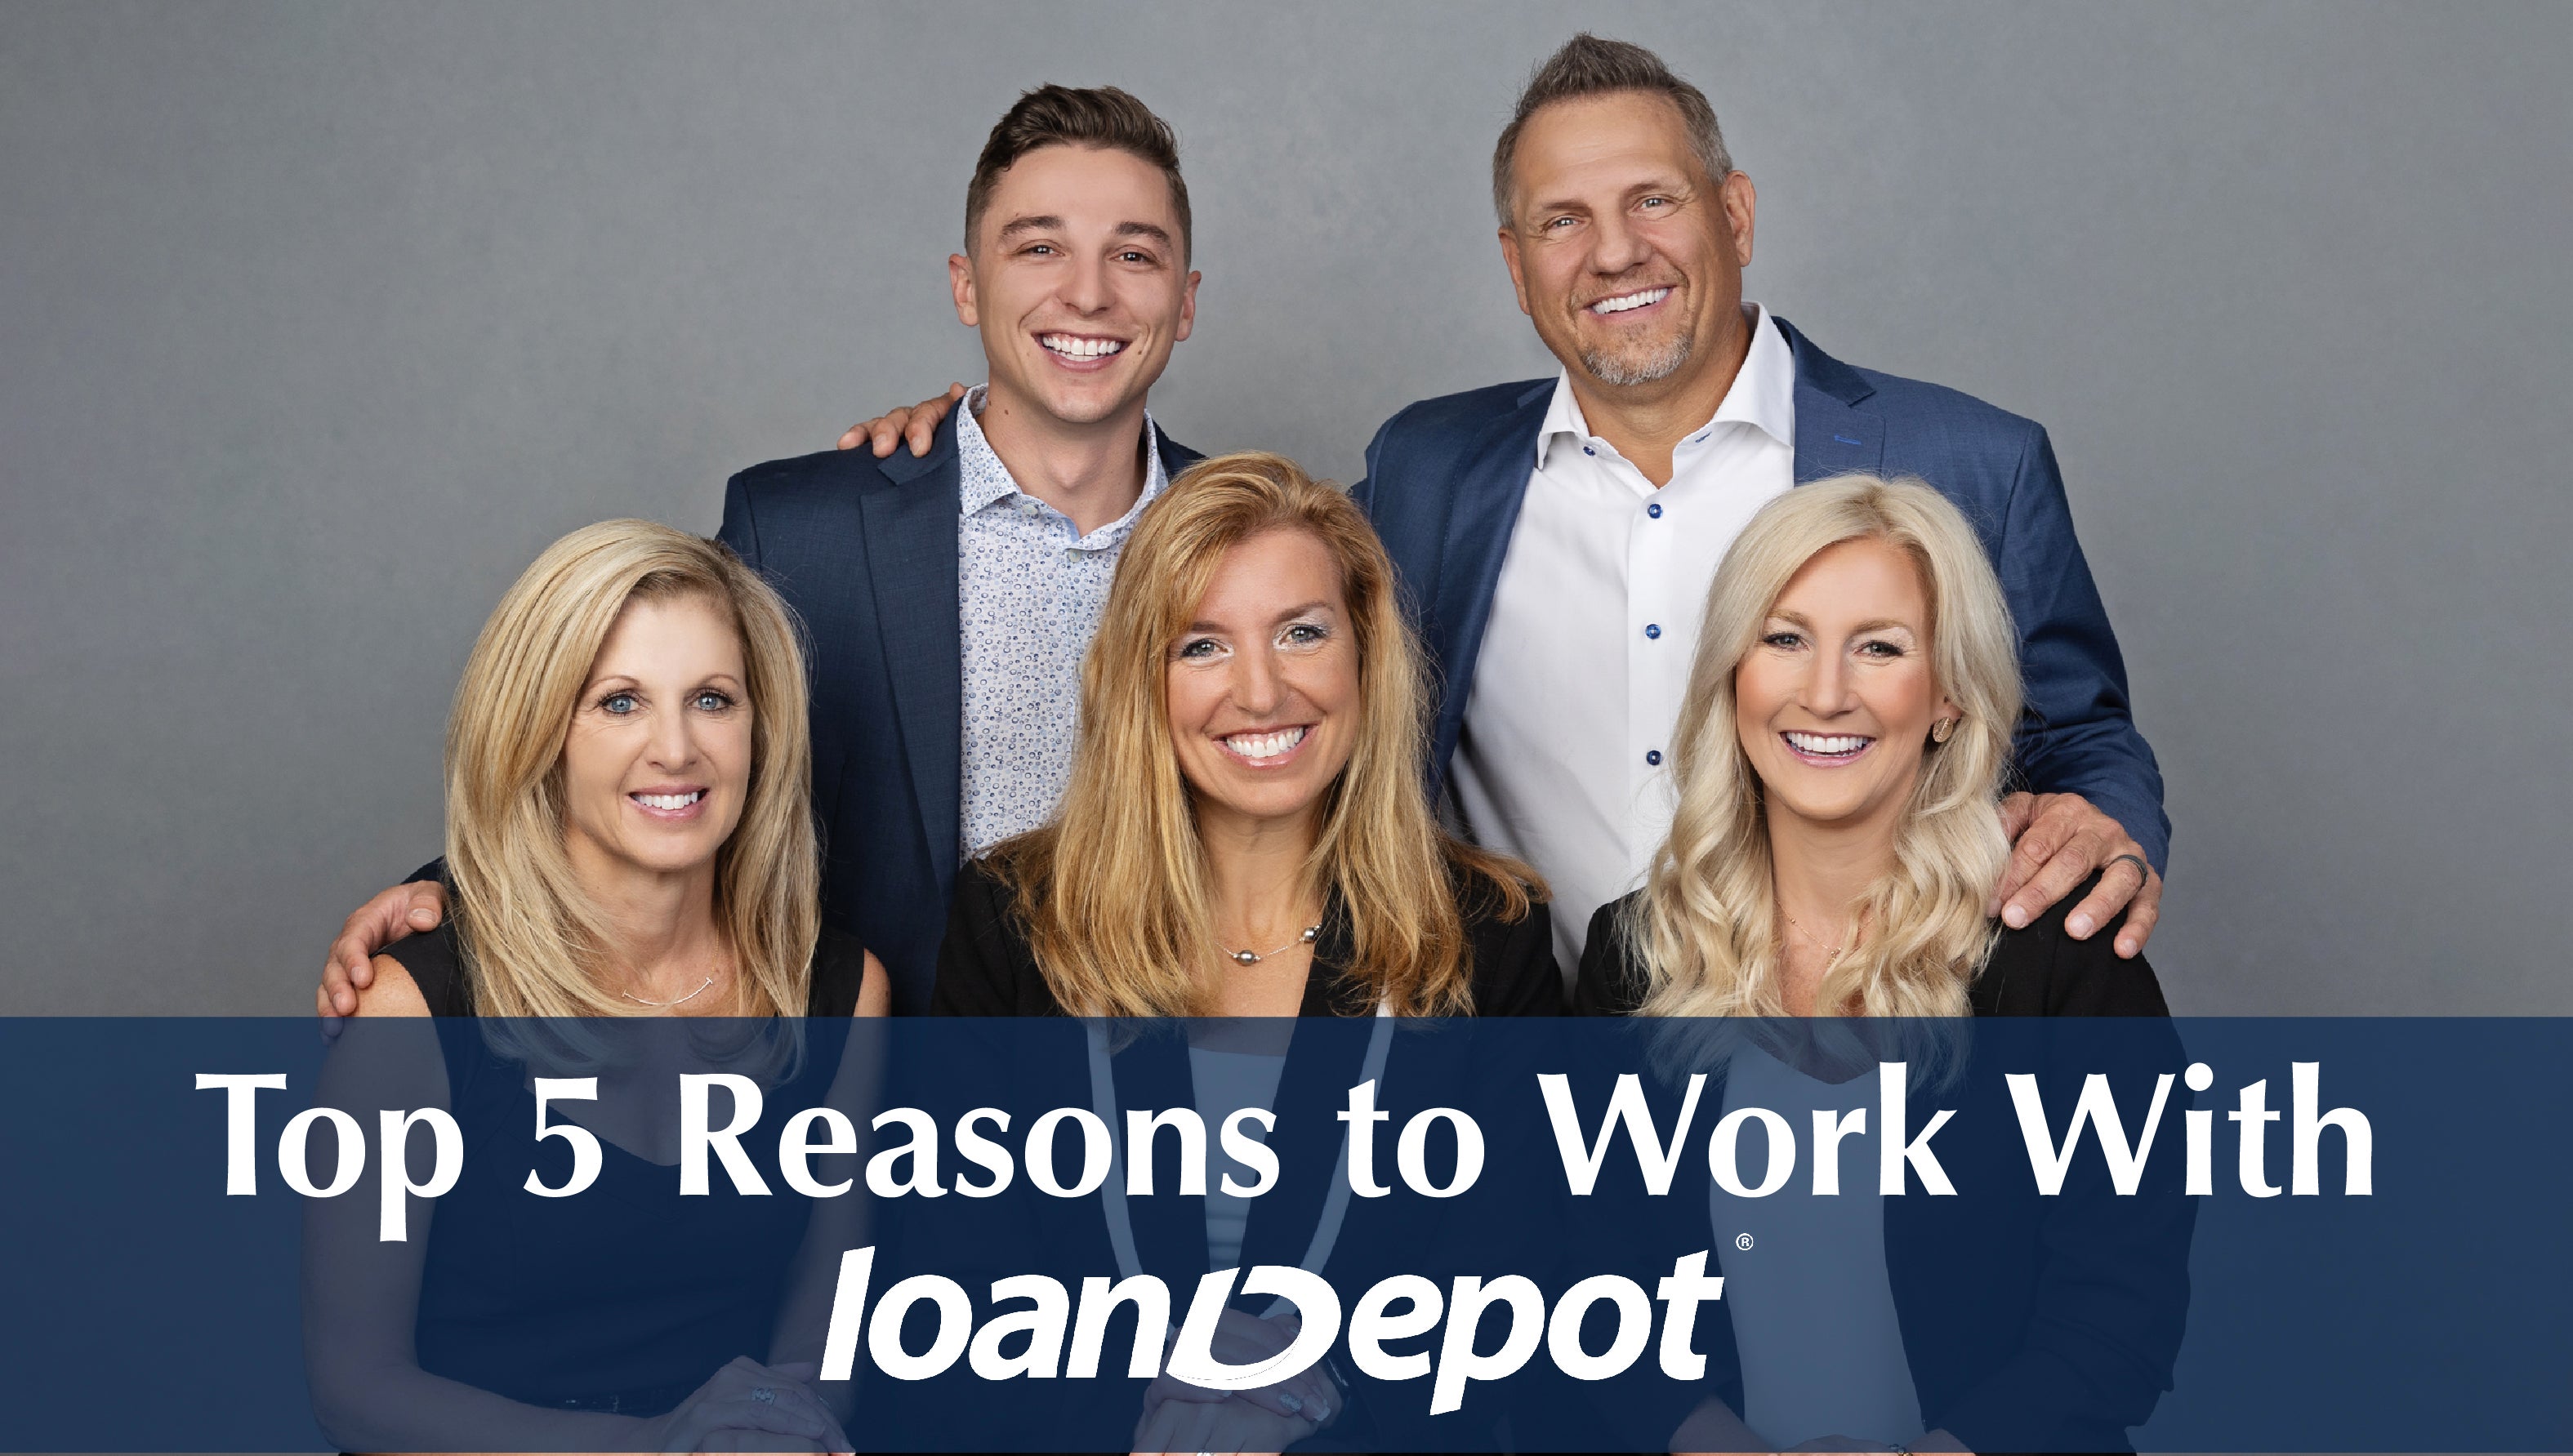 The Top 5 Reasons to Work With our Preferred Lender, loanDepot